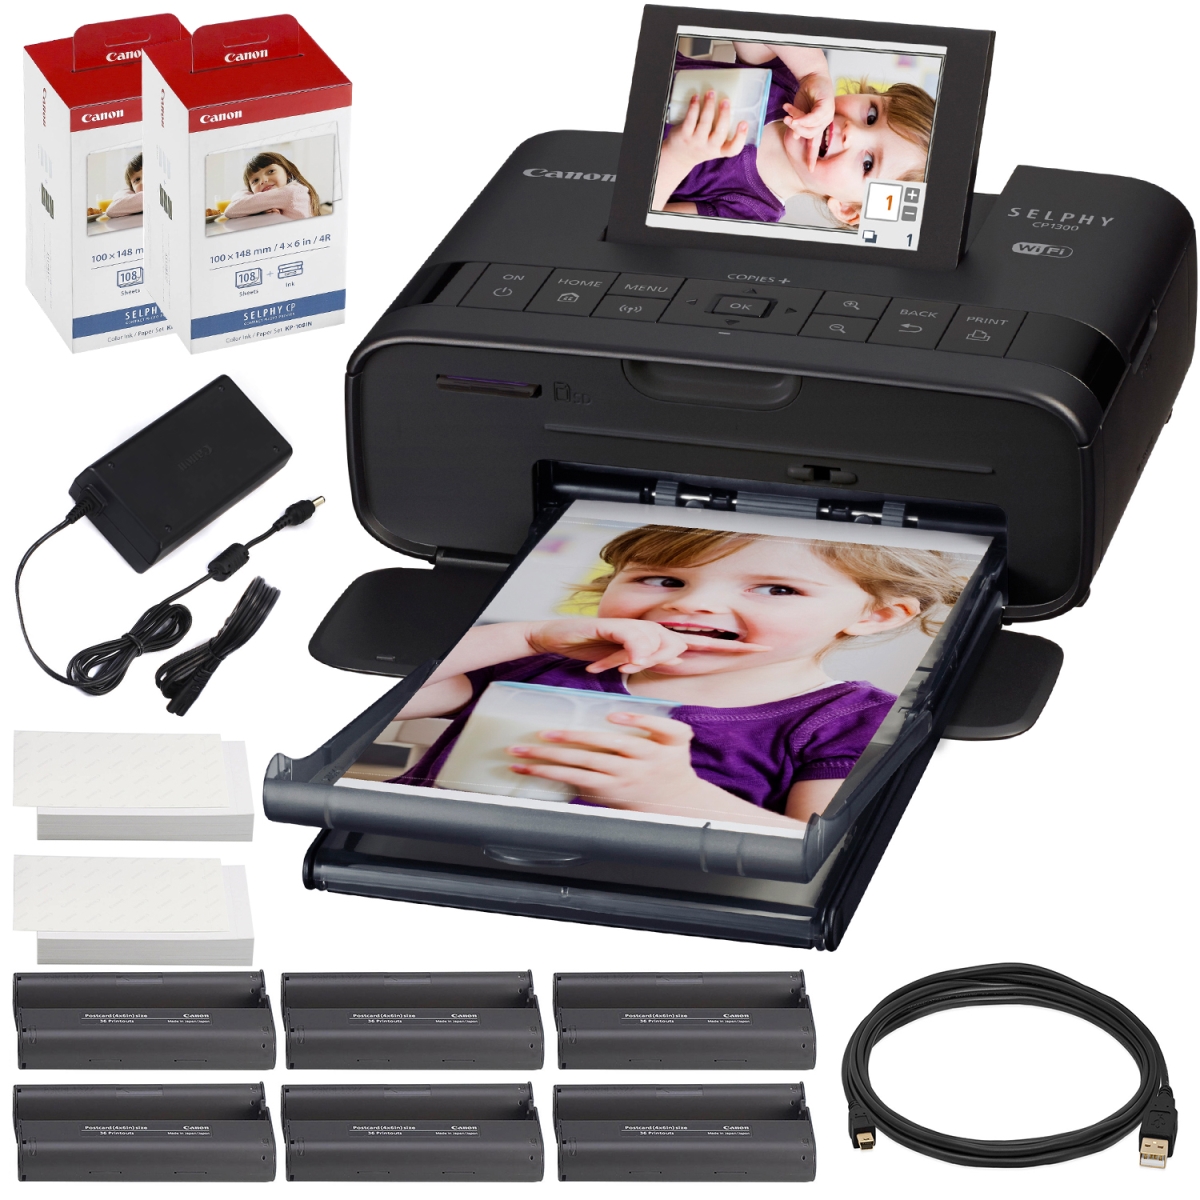 CANON-CP1300-2234C001-2PK-KIT967-NFBA Selphy Compact Photo Printer with Wi-Fi & 2x Color Ink & Paper Set&#44; Black